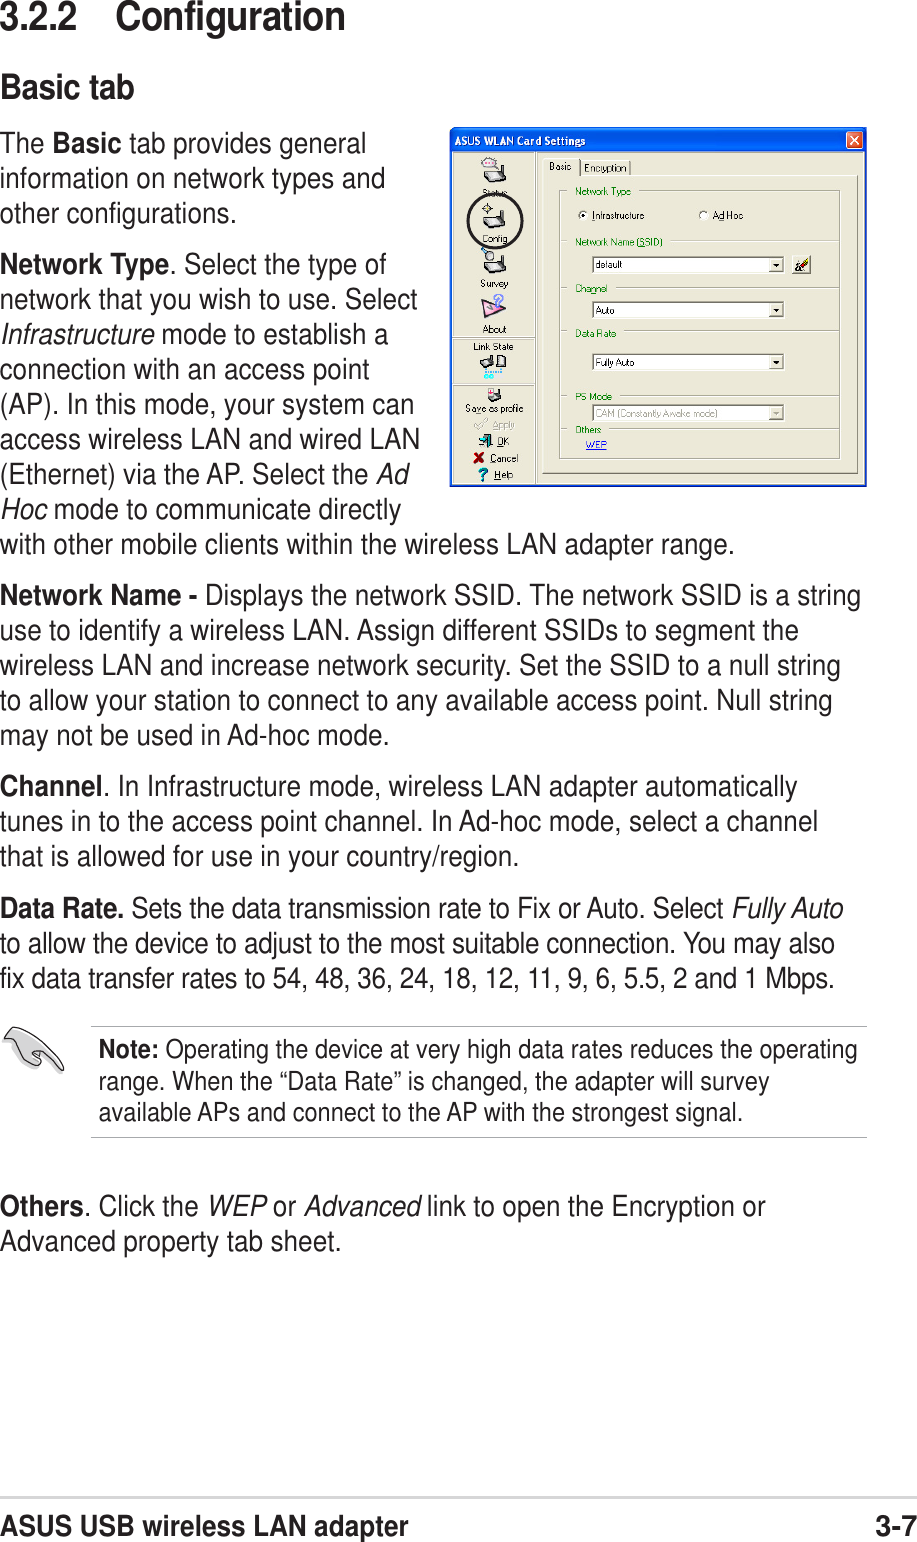 ASUS USB wireless LAN adapter3-73.2.2 ConfigurationBasic tabThe Basic tab provides generalinformation on network types andother configurations.Network Type. Select the type ofnetwork that you wish to use. SelectInfrastructure mode to establish aconnection with an access point(AP). In this mode, your system canaccess wireless LAN and wired LAN(Ethernet) via the AP. Select the AdHoc mode to communicate directlywith other mobile clients within the wireless LAN adapter range.Network Name - Displays the network SSID. The network SSID is a stringuse to identify a wireless LAN. Assign different SSIDs to segment thewireless LAN and increase network security. Set the SSID to a null stringto allow your station to connect to any available access point. Null stringmay not be used in Ad-hoc mode.Channel. In Infrastructure mode, wireless LAN adapter automaticallytunes in to the access point channel. In Ad-hoc mode, select a channelthat is allowed for use in your country/region.Data Rate. Sets the data transmission rate to Fix or Auto. Select Fully Autoto allow the device to adjust to the most suitable connection. You may alsofix data transfer rates to 54, 48, 36, 24, 18, 12, 11, 9, 6, 5.5, 2 and 1 Mbps.Others. Click the WEP or Advanced link to open the Encryption orAdvanced property tab sheet.Note: Operating the device at very high data rates reduces the operatingrange. When the “Data Rate” is changed, the adapter will surveyavailable APs and connect to the AP with the strongest signal.